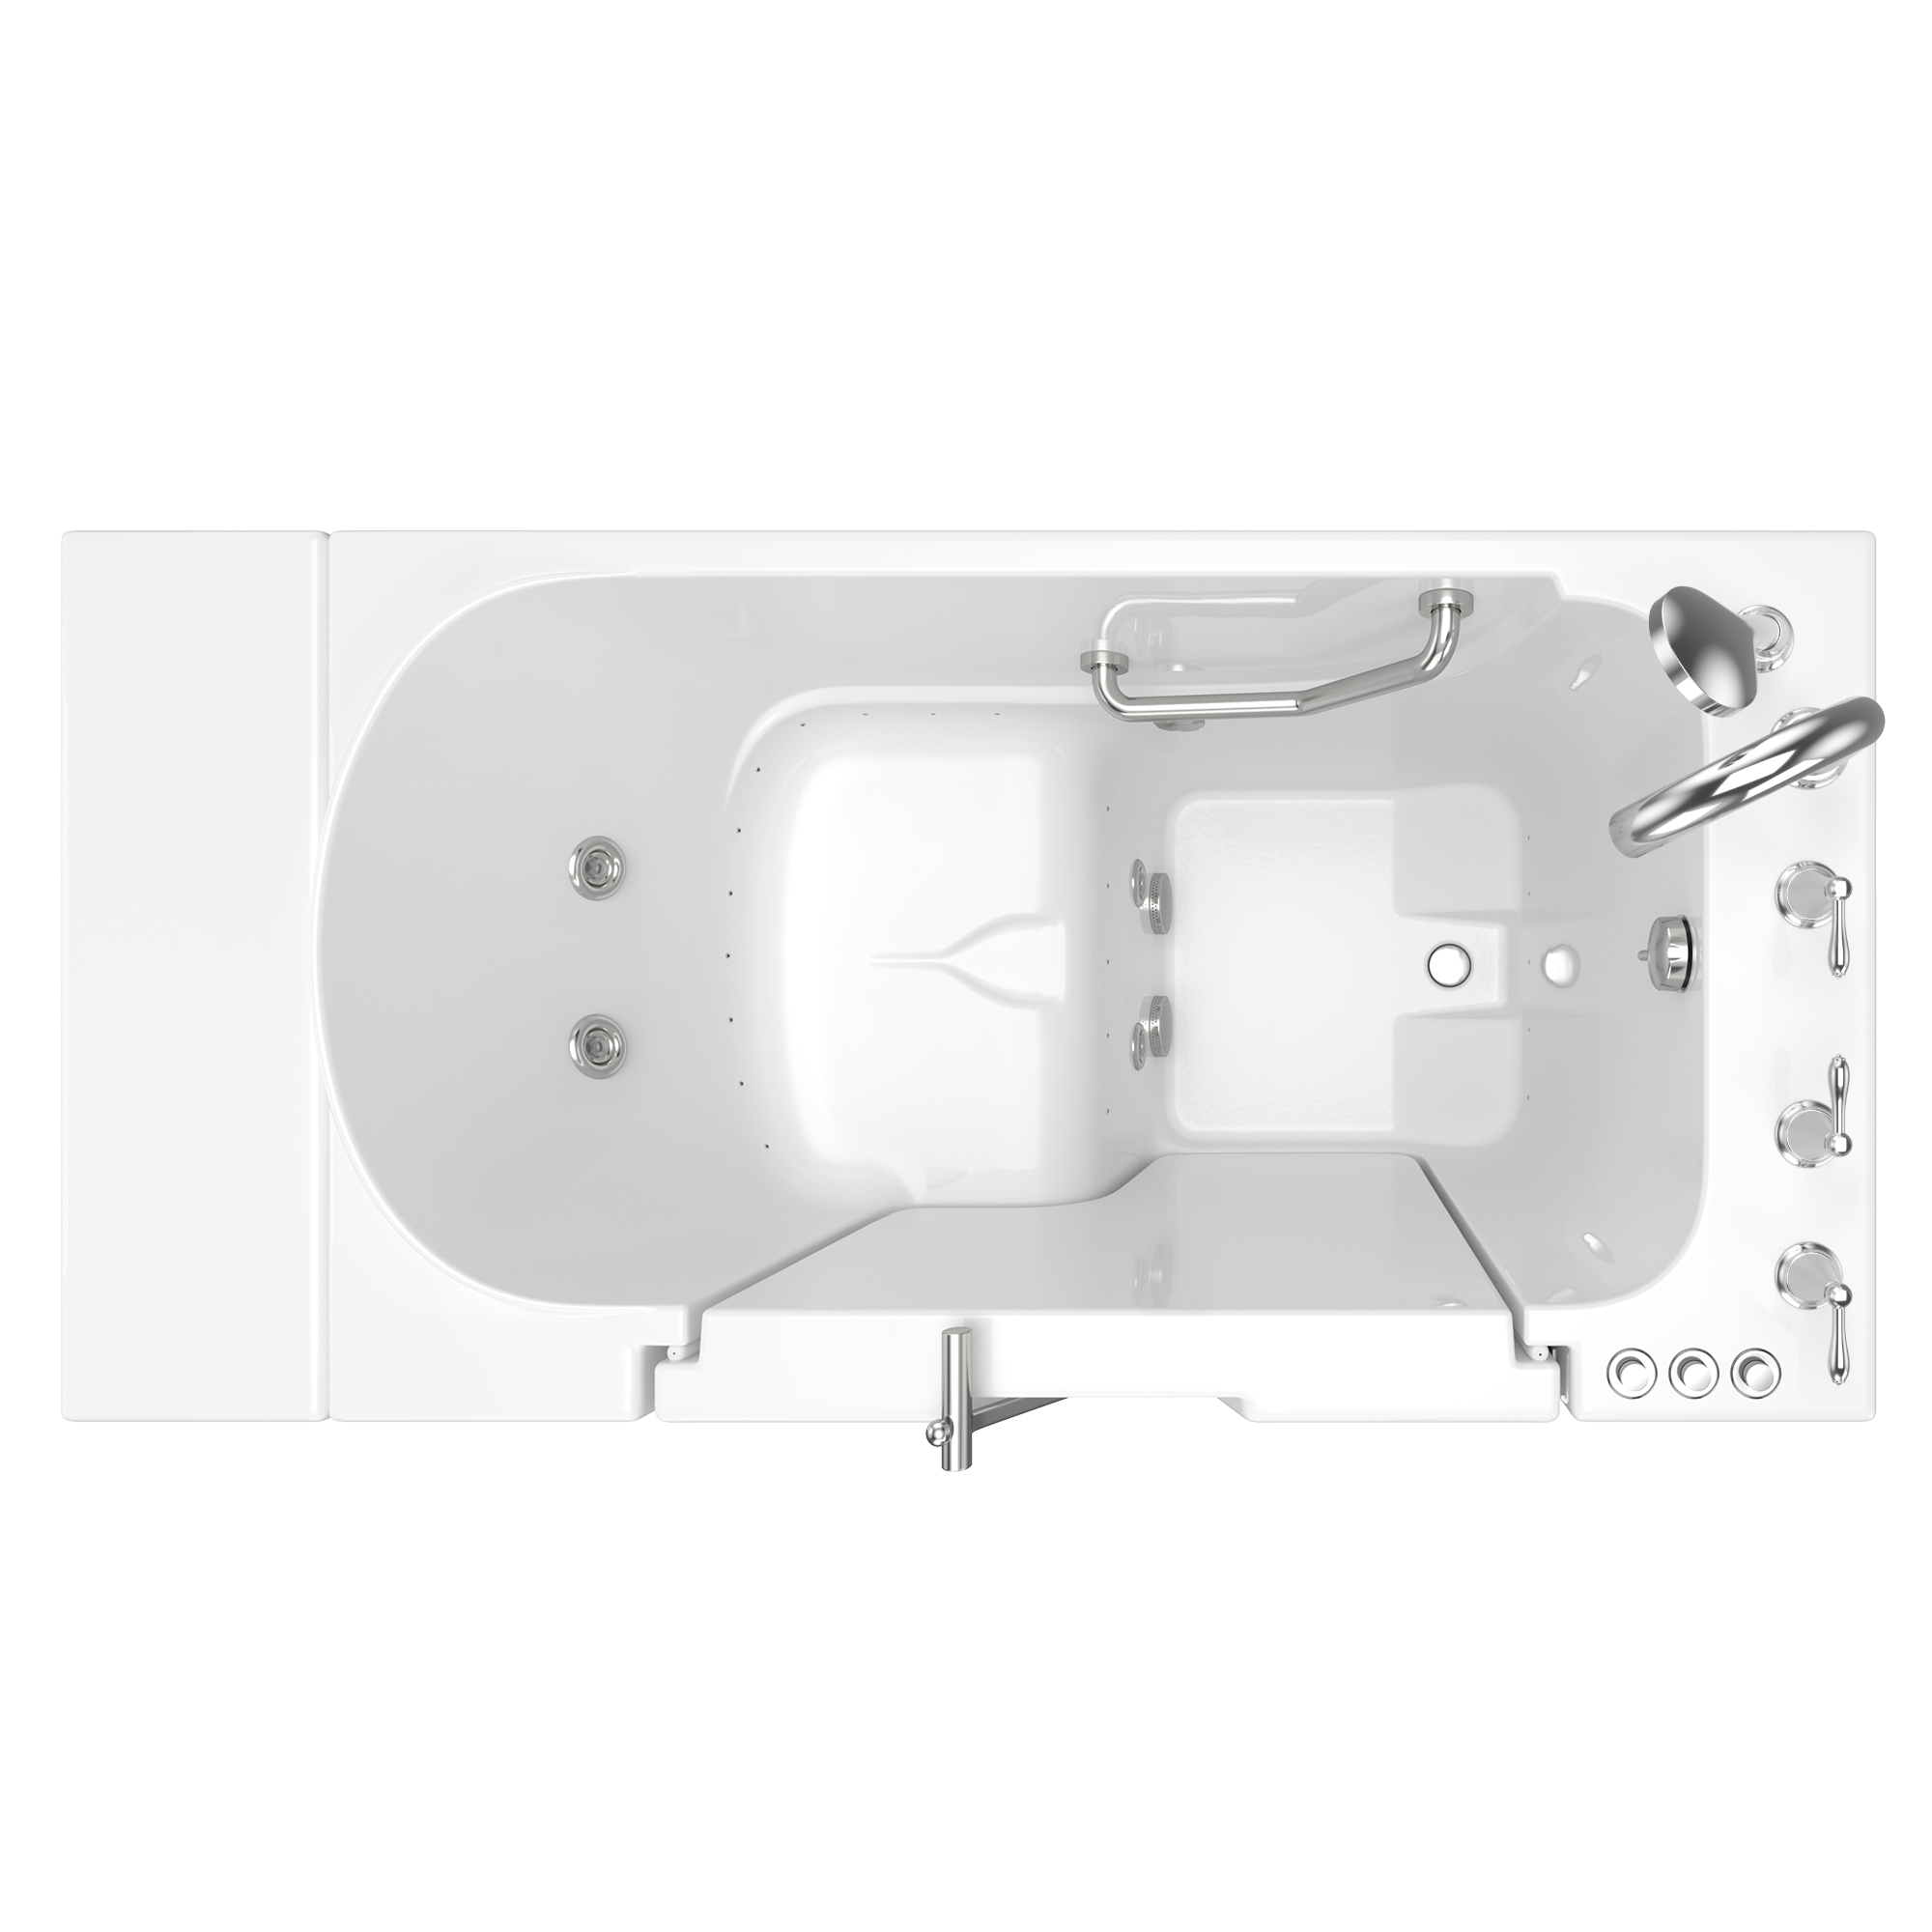 Gelcoat Value Series 30 x 52 -Inch Walk-in Tub With Combination Air Spa and Whirlpool Systems - Right-Hand Drain With Faucet